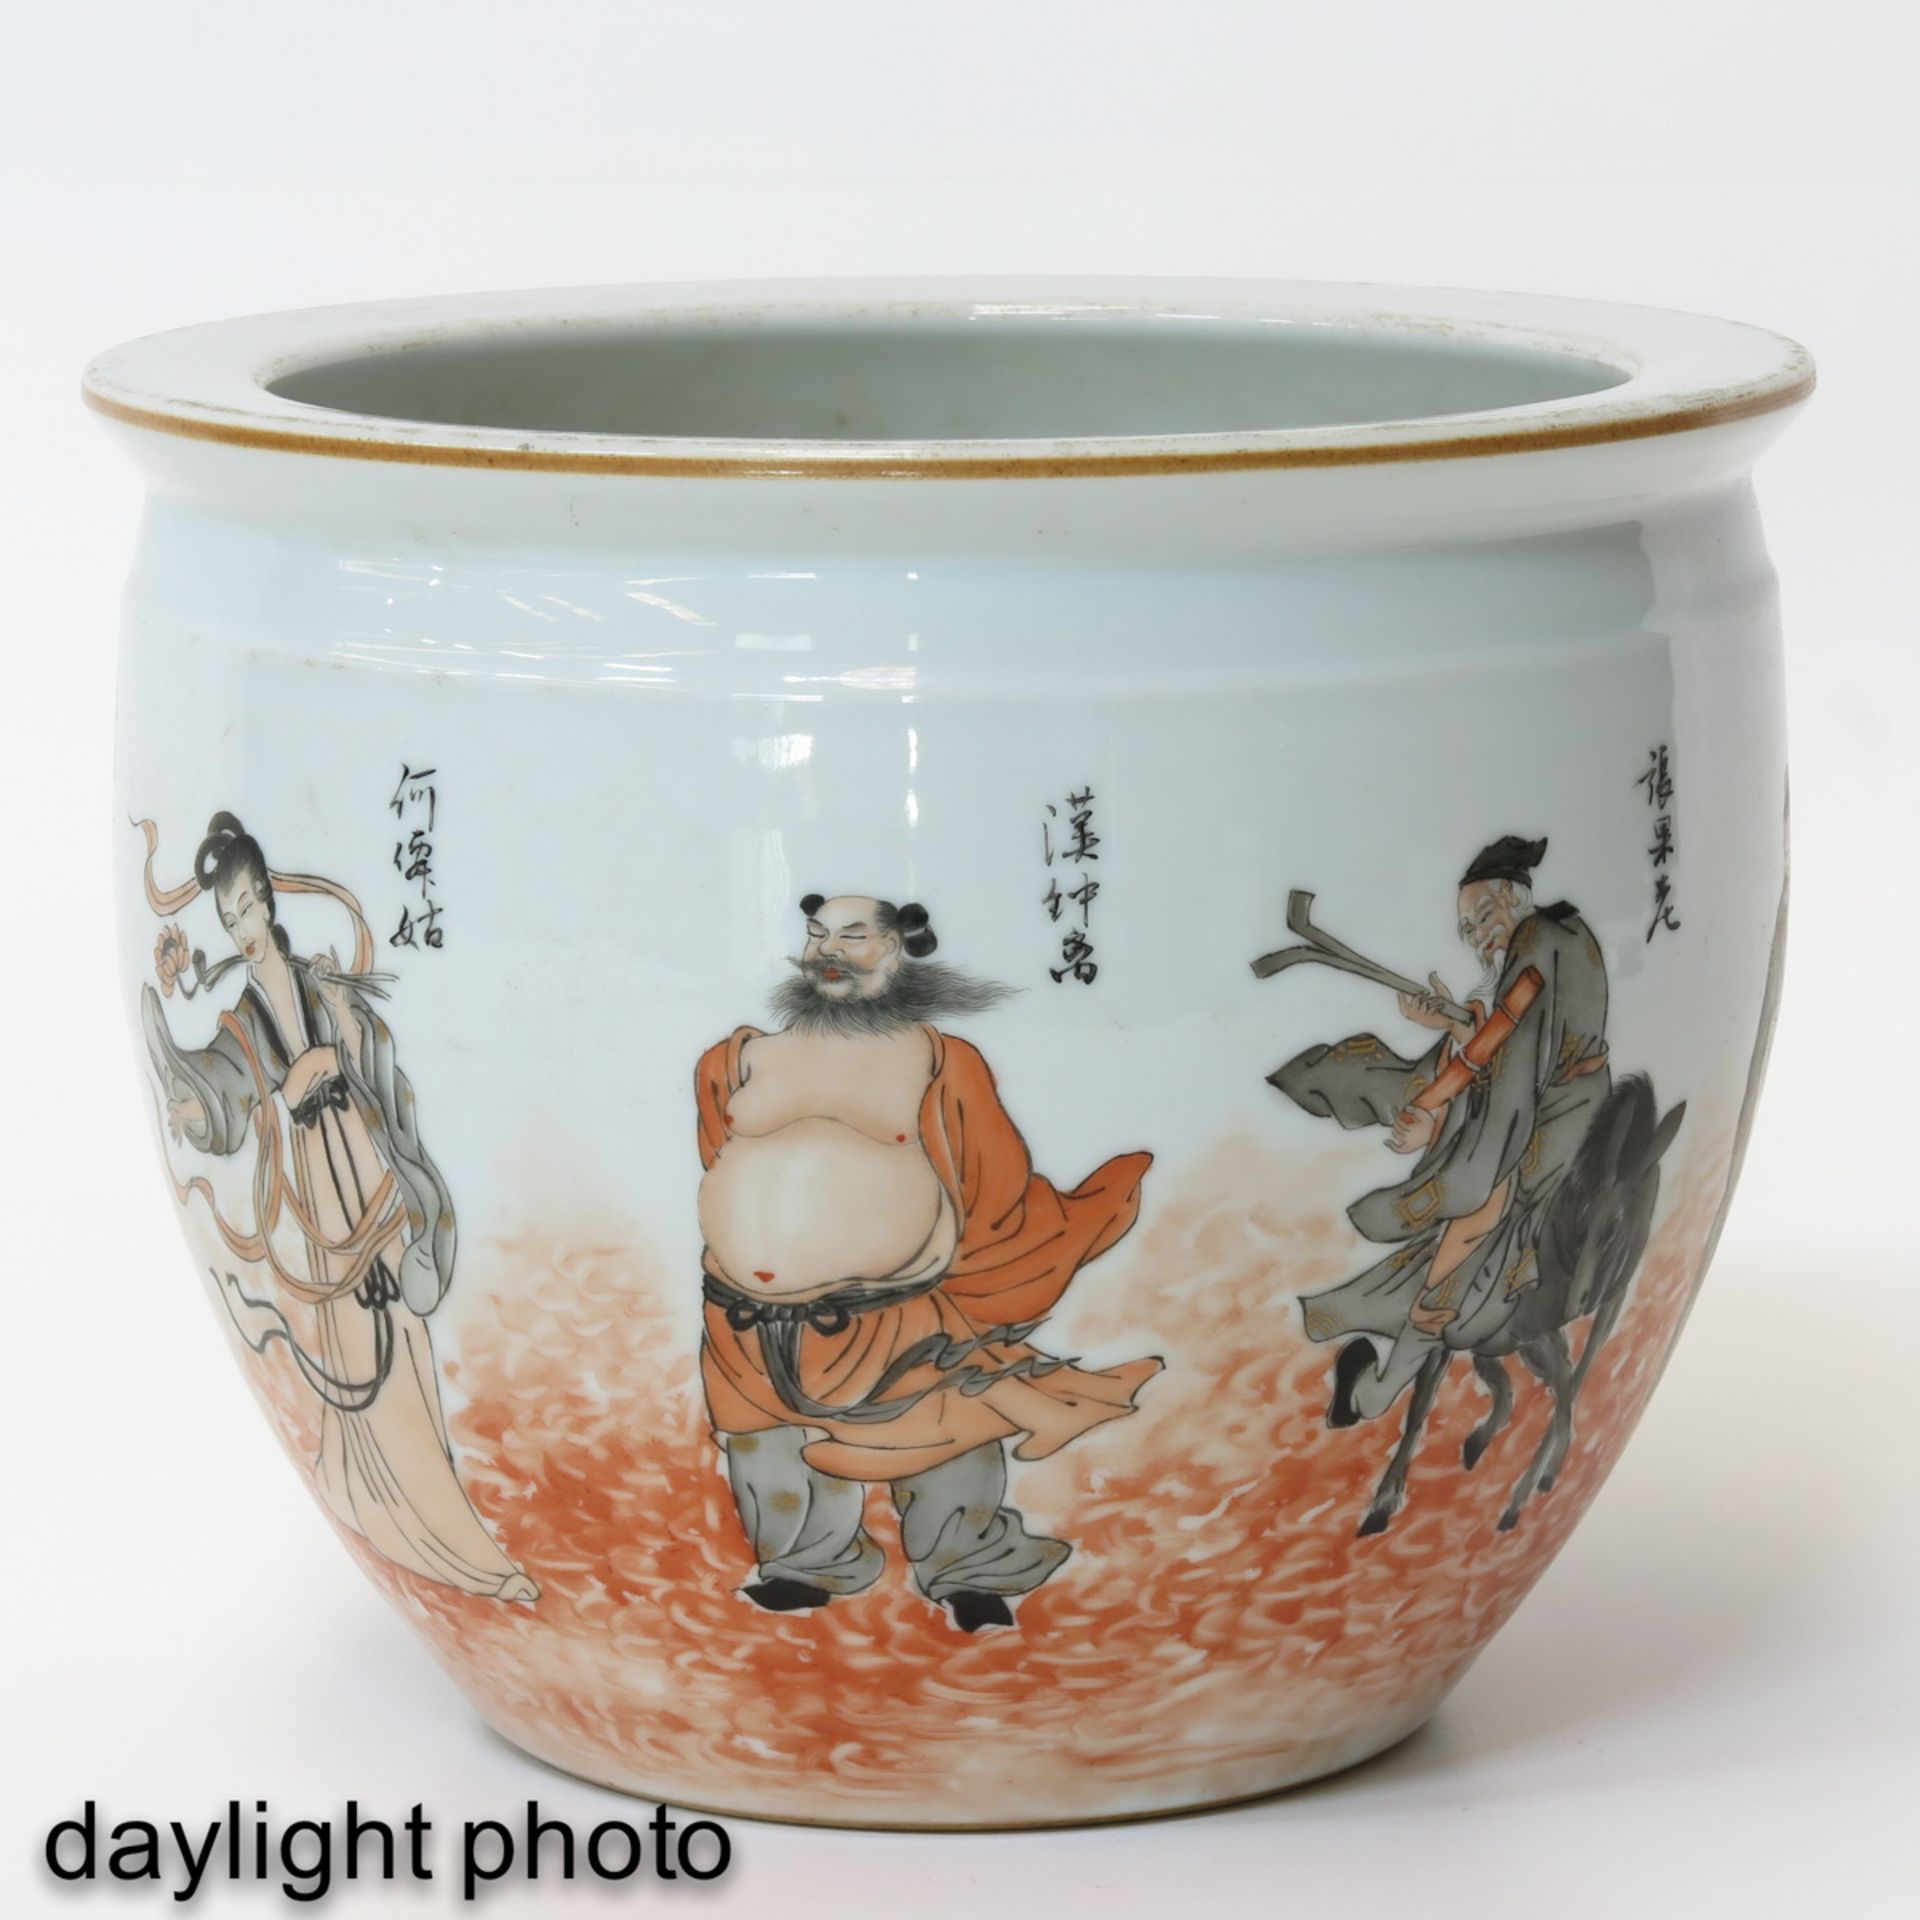 A Polyhchrome Decor Fish Bowl - Image 7 of 10